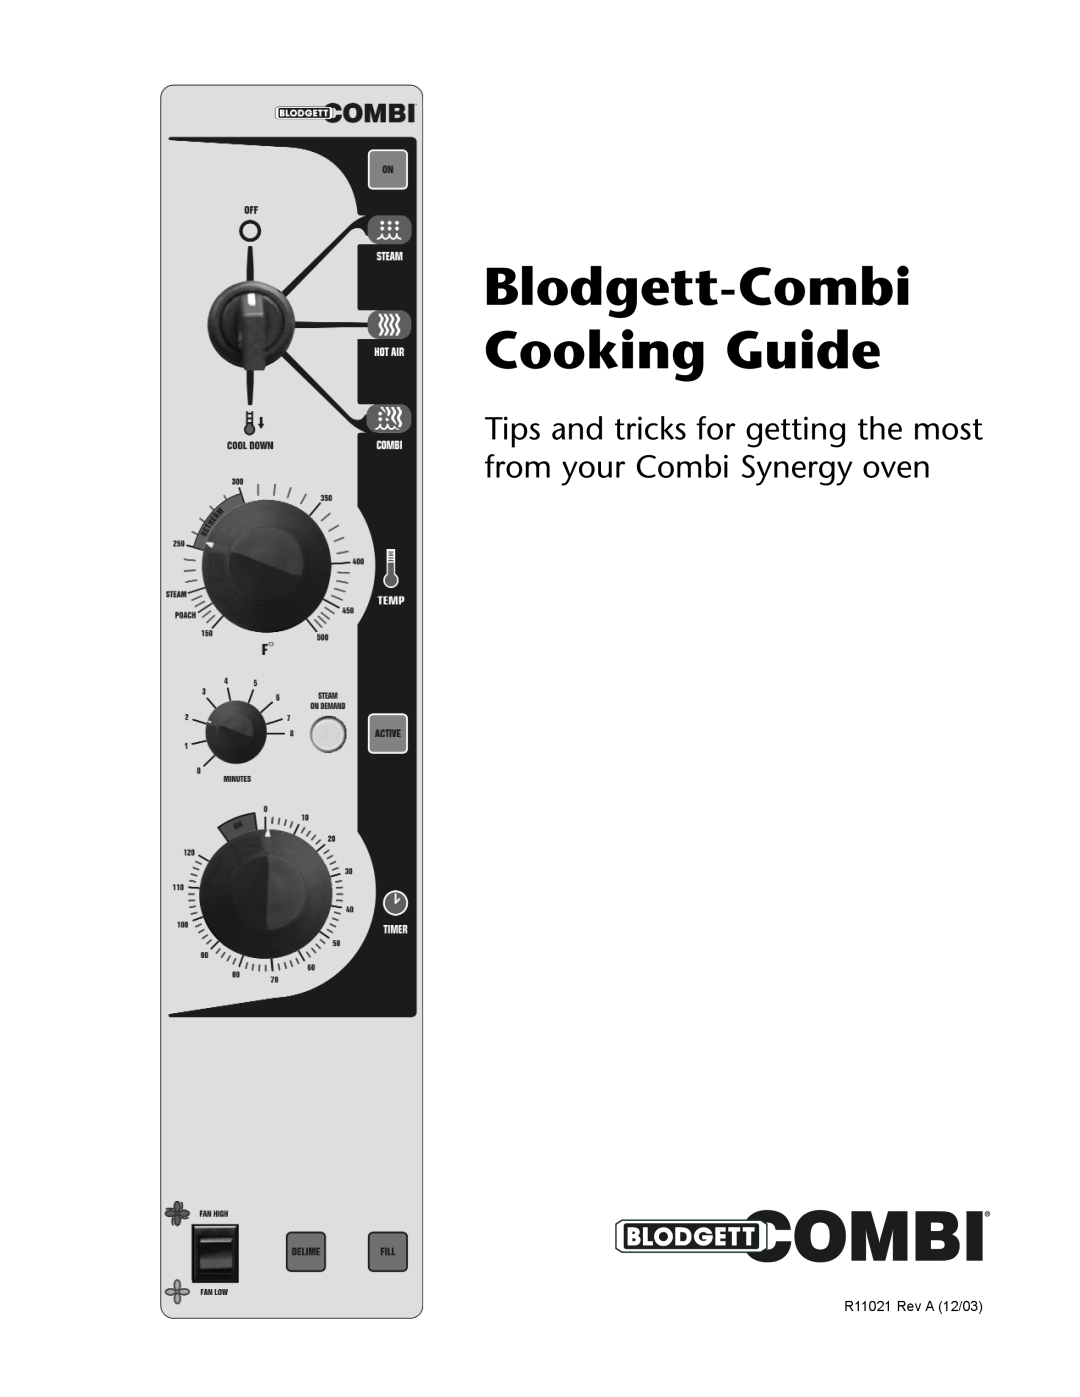 Blodgett R11021 manual Blodgett-Combi Cooking Guide, Tips and tricks for getting the most from your Combi Synergy oven 